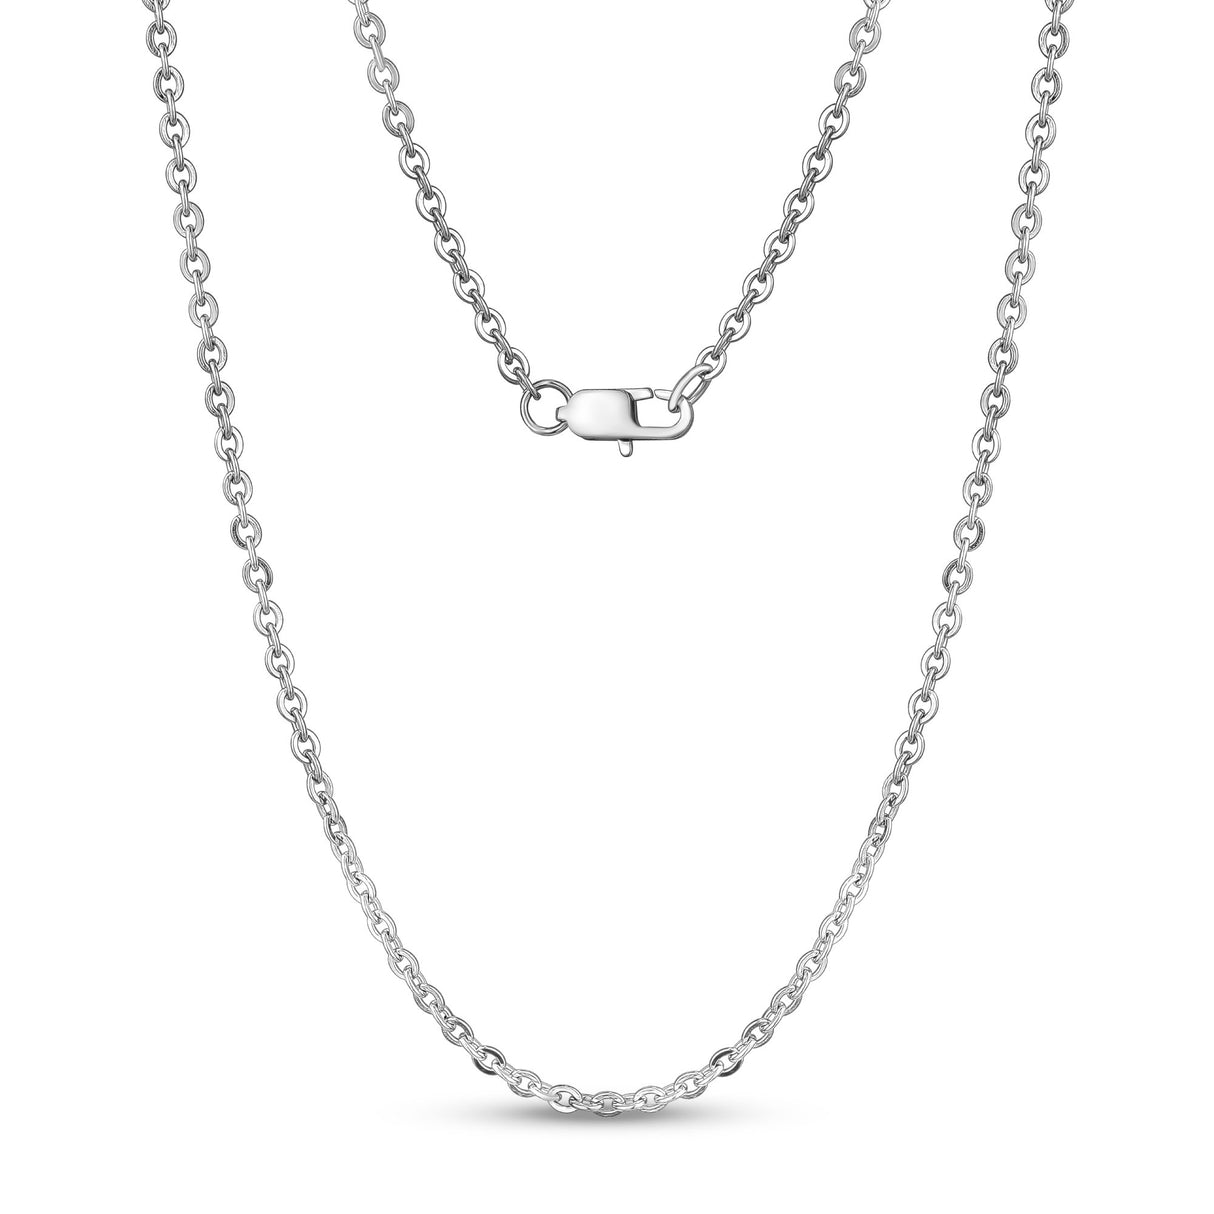 Unisex Necklaces - 3mm Flat Anchor Oval Link Steel Chain Necklace